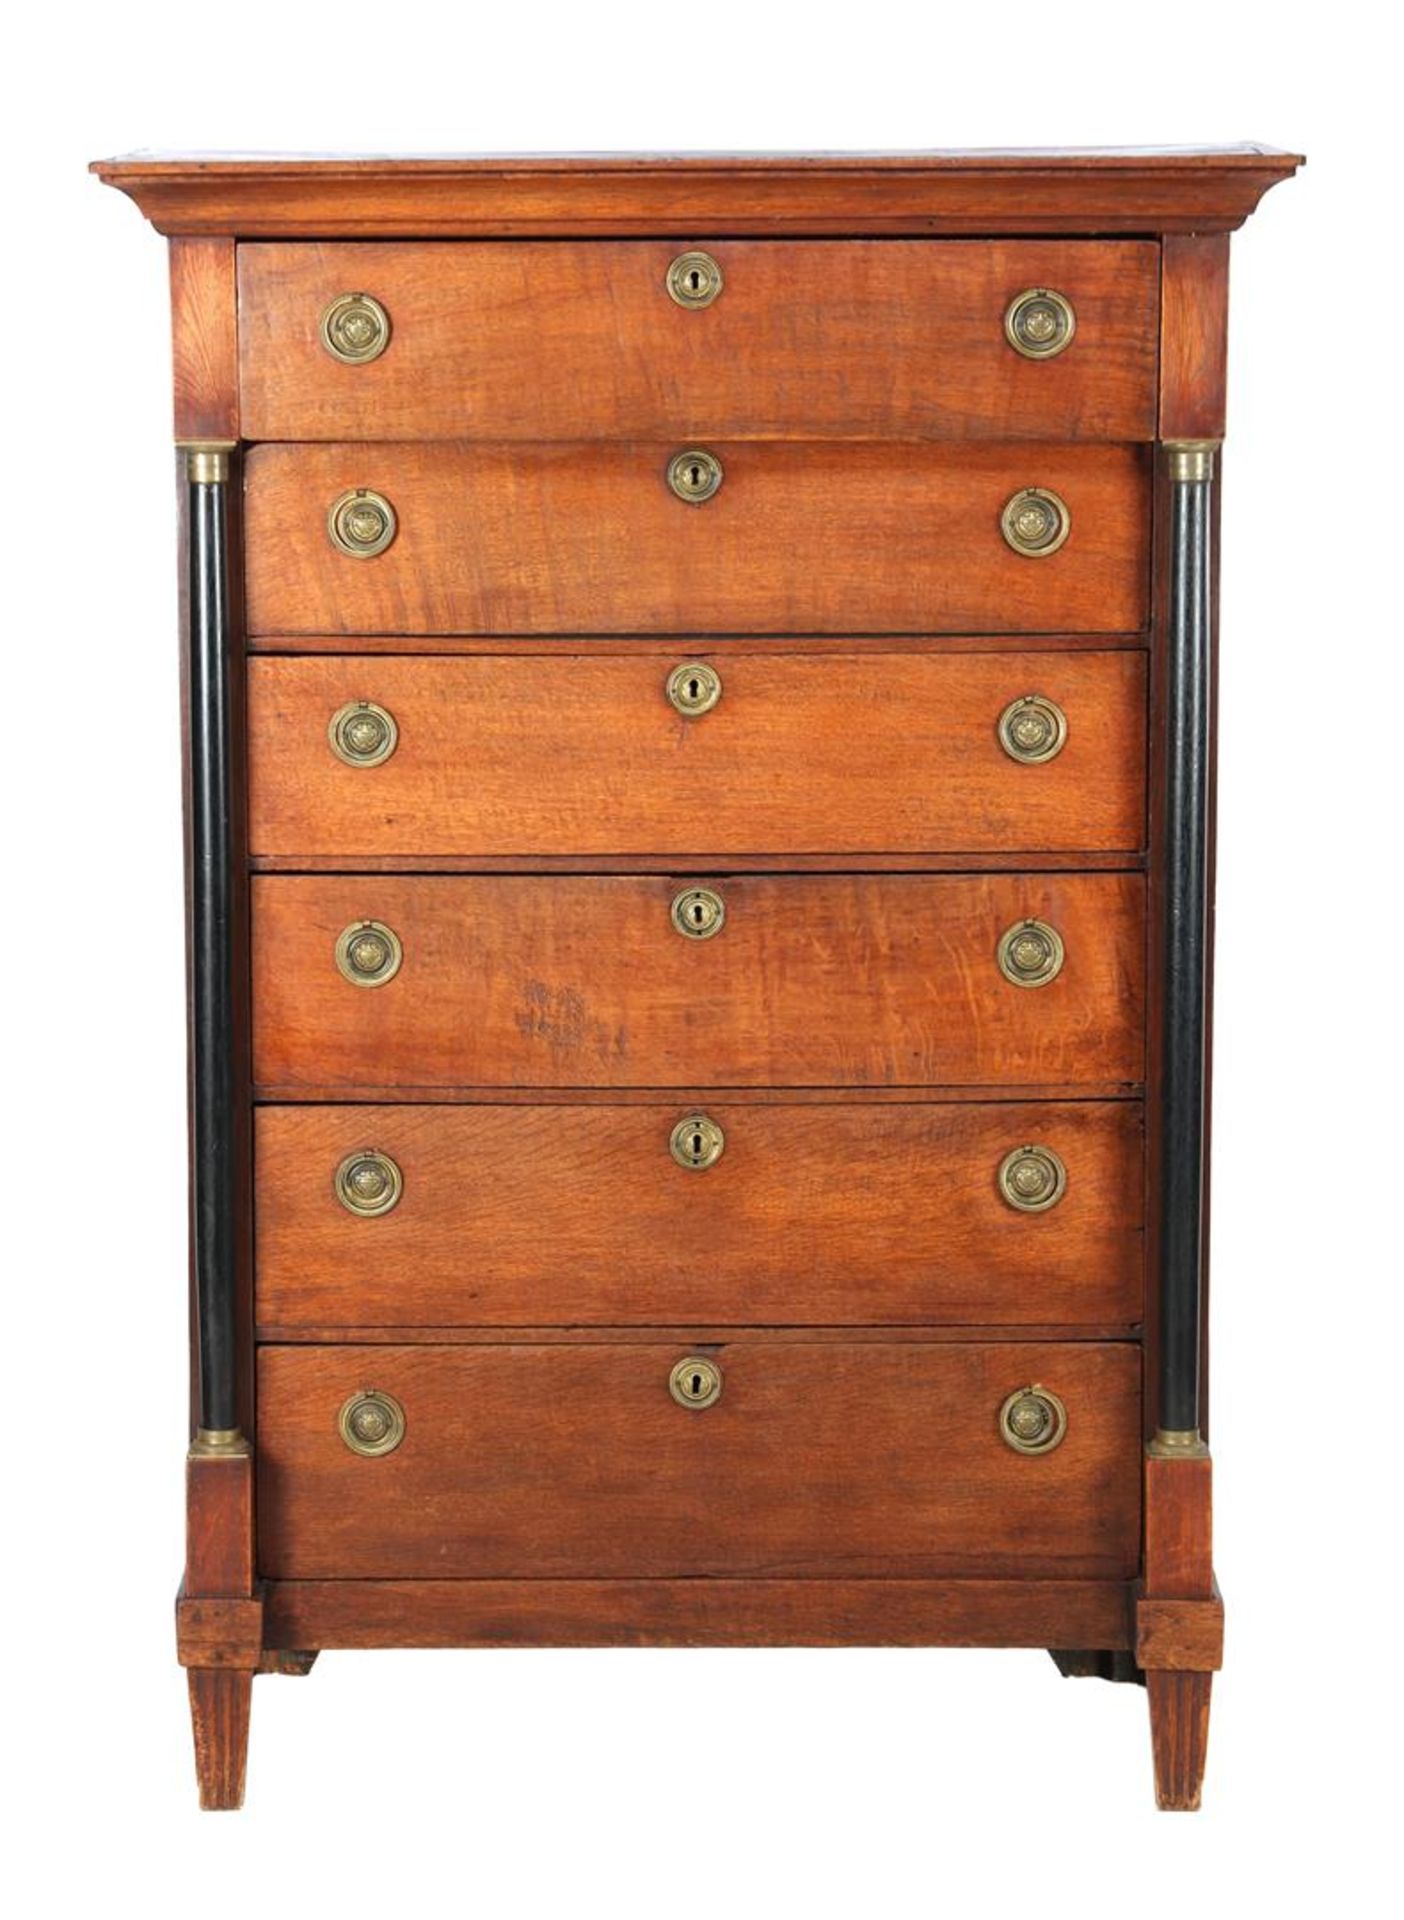 Oak 6-drawer chiffonniere with full blackened columns, approx. 1800